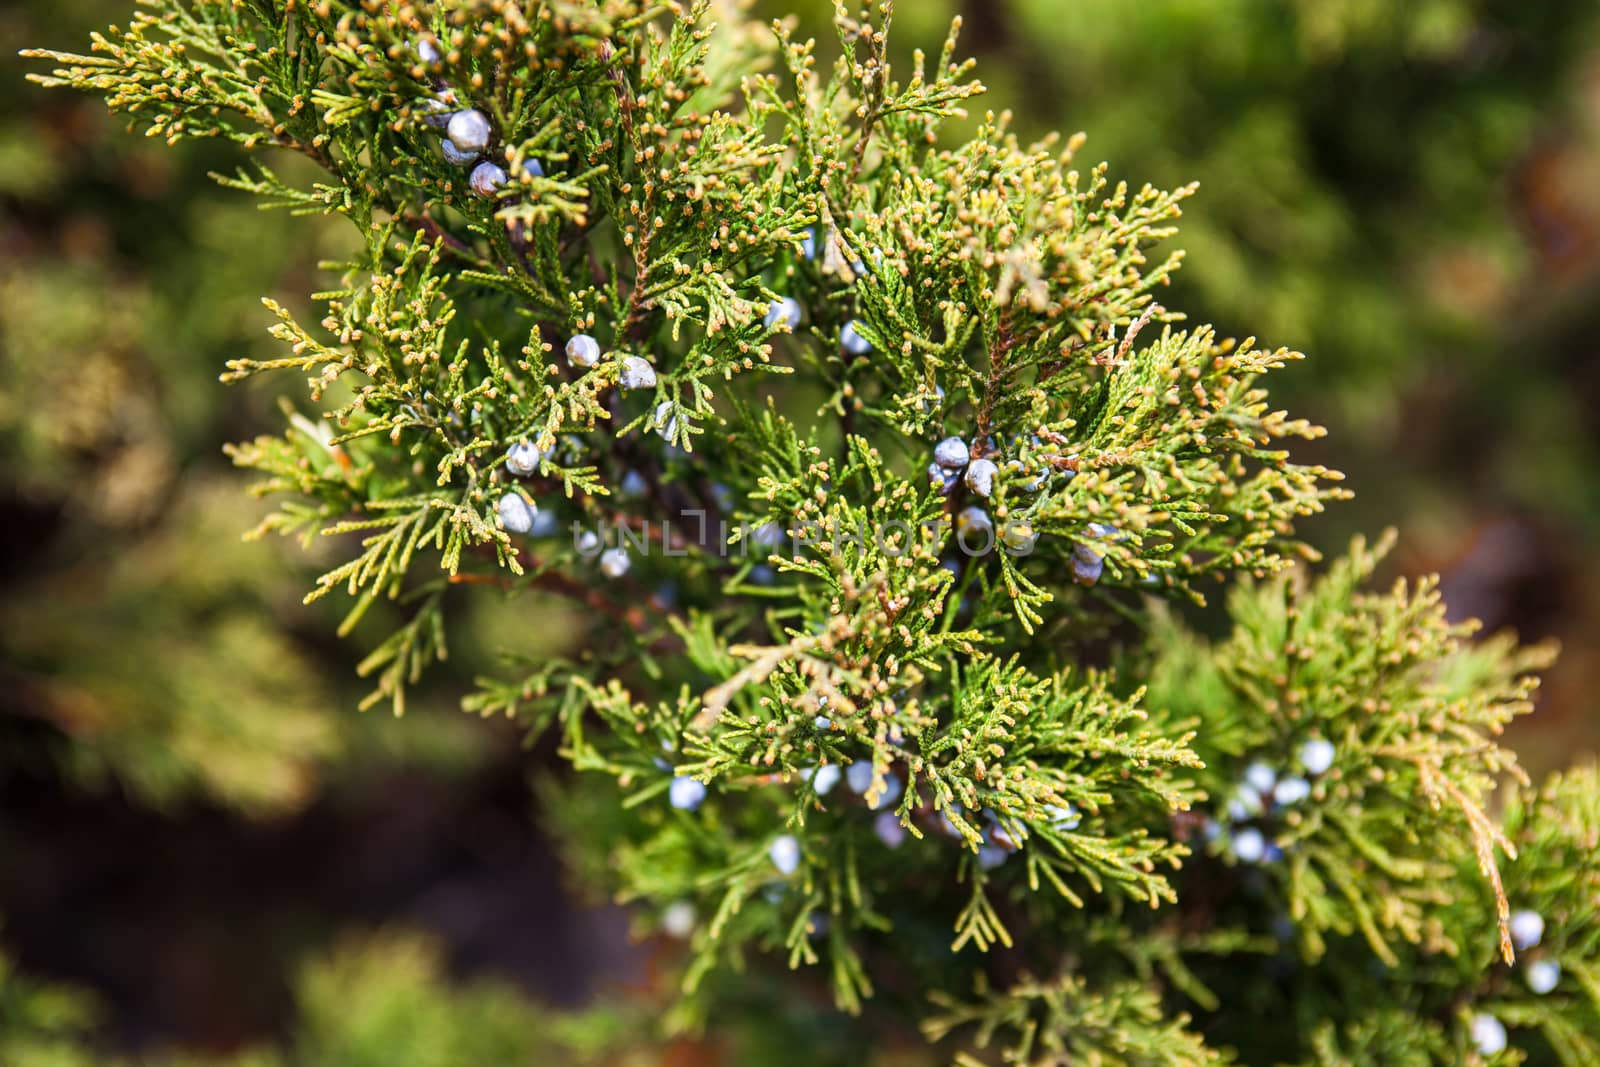 Juniper branch with female cones by rootstocks